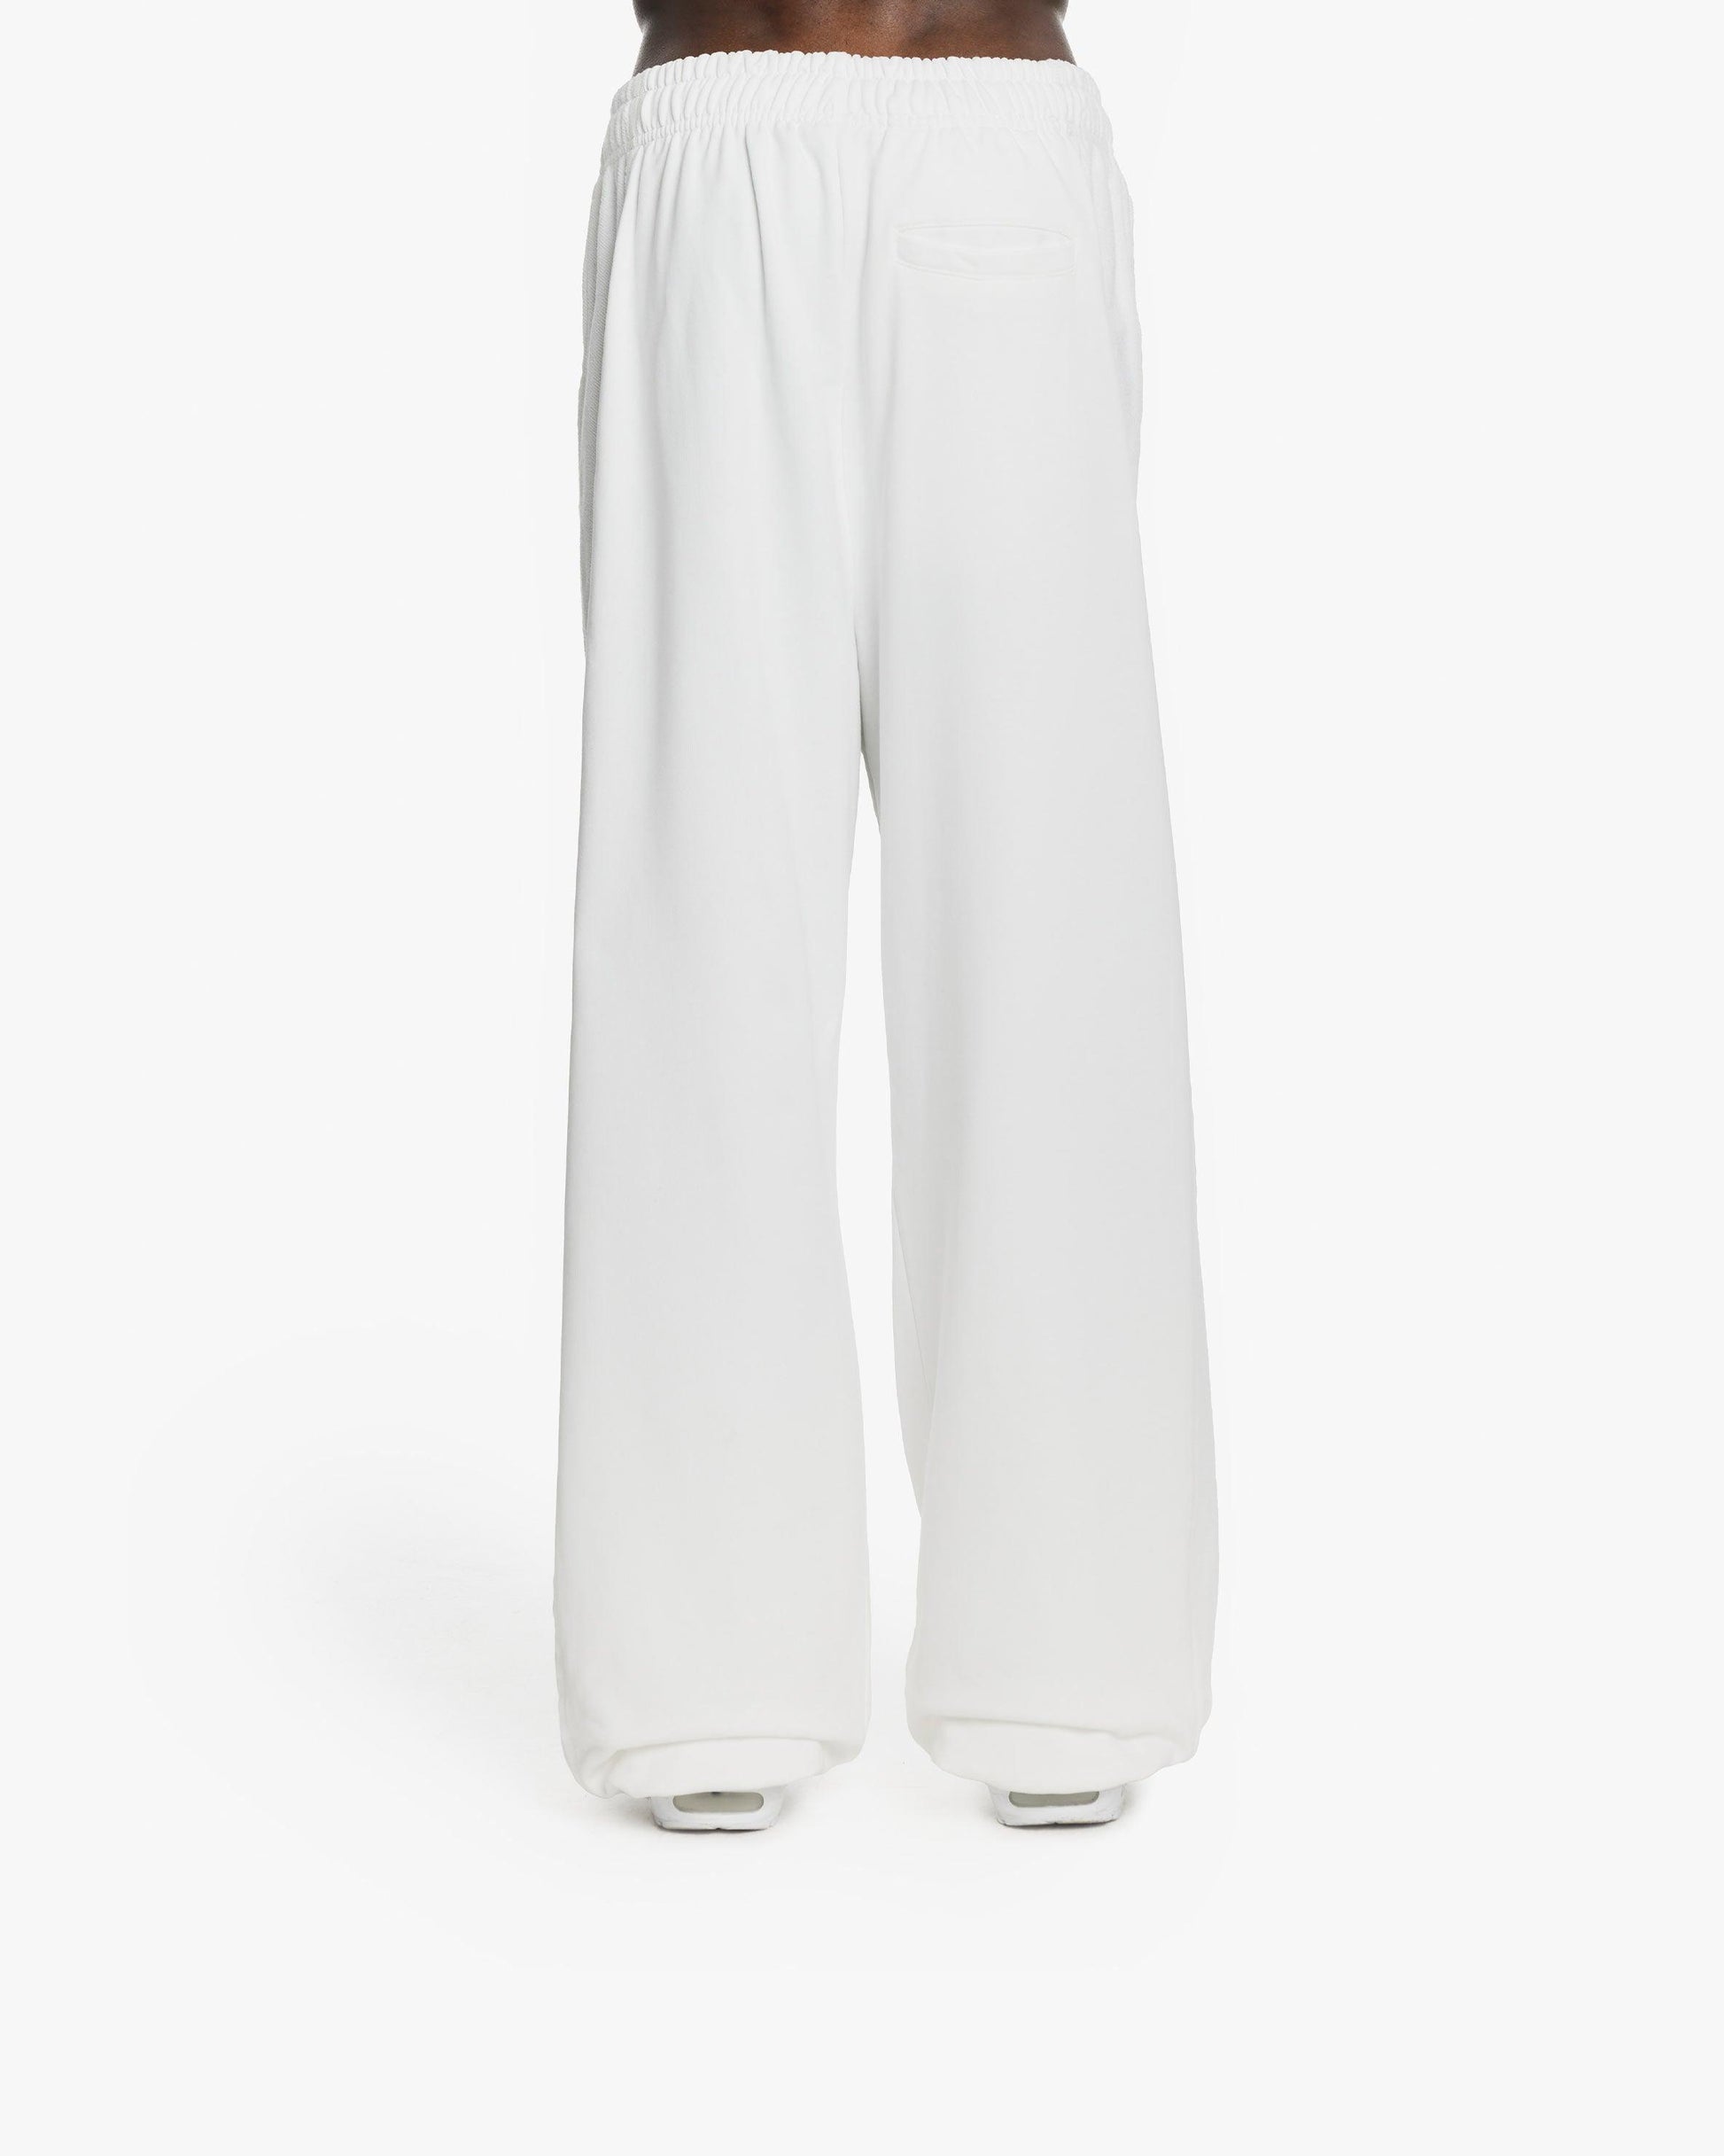 INSIDE OUT JOGGER WHITE - VICINITY